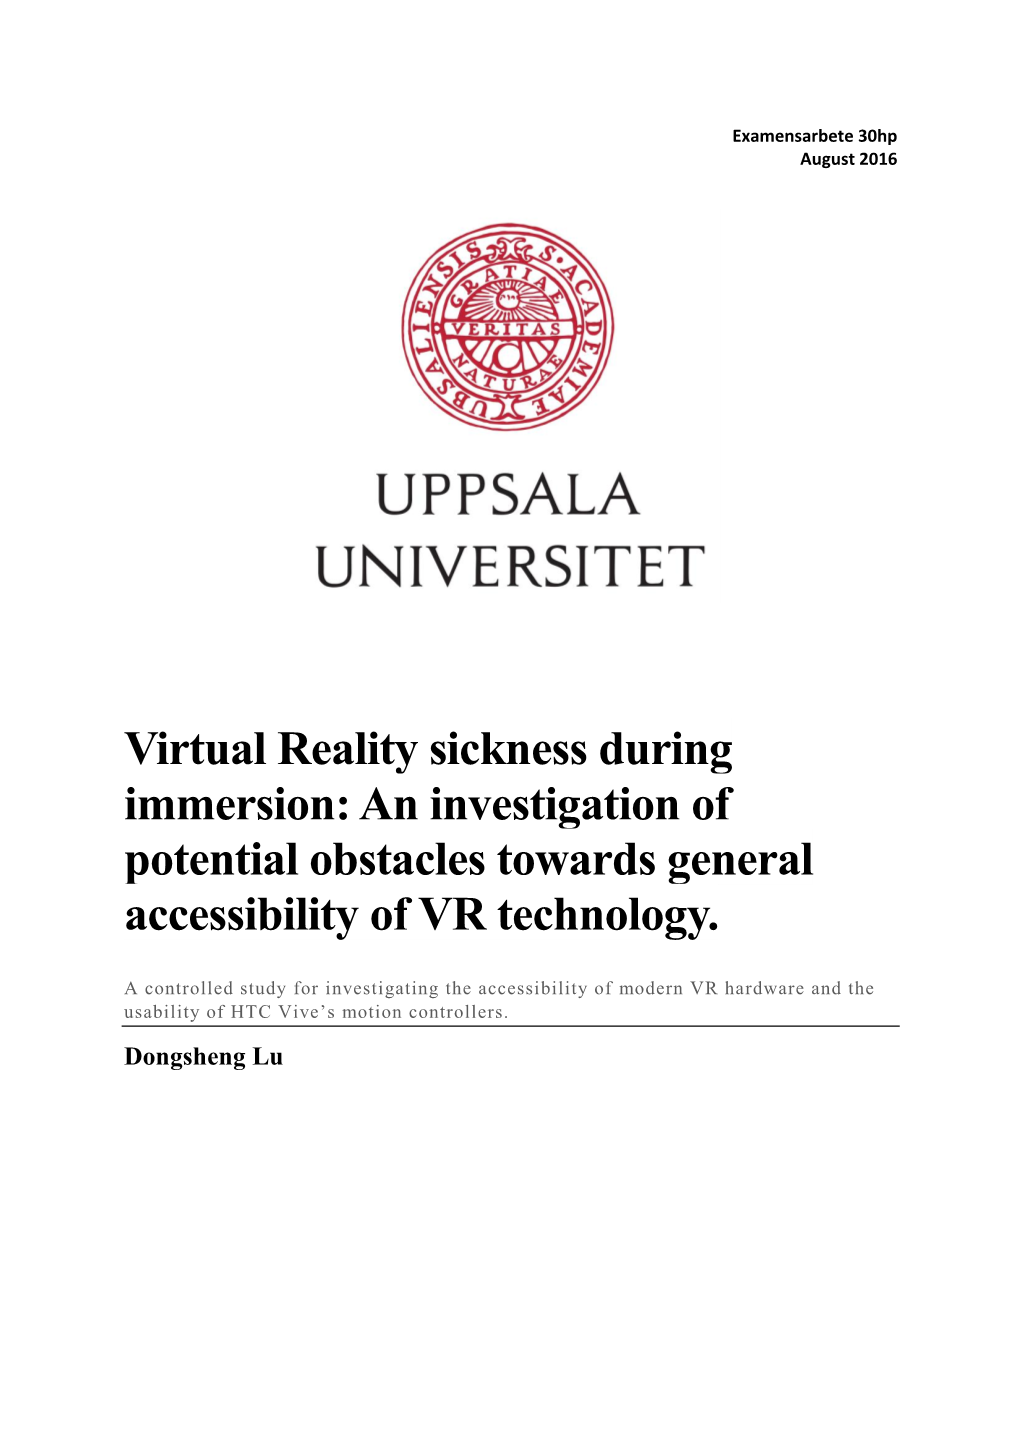 Virtual Reality Sickness During Immersion: an Investigation of Potential Obstacles Towards General Accessibility of VR Technology